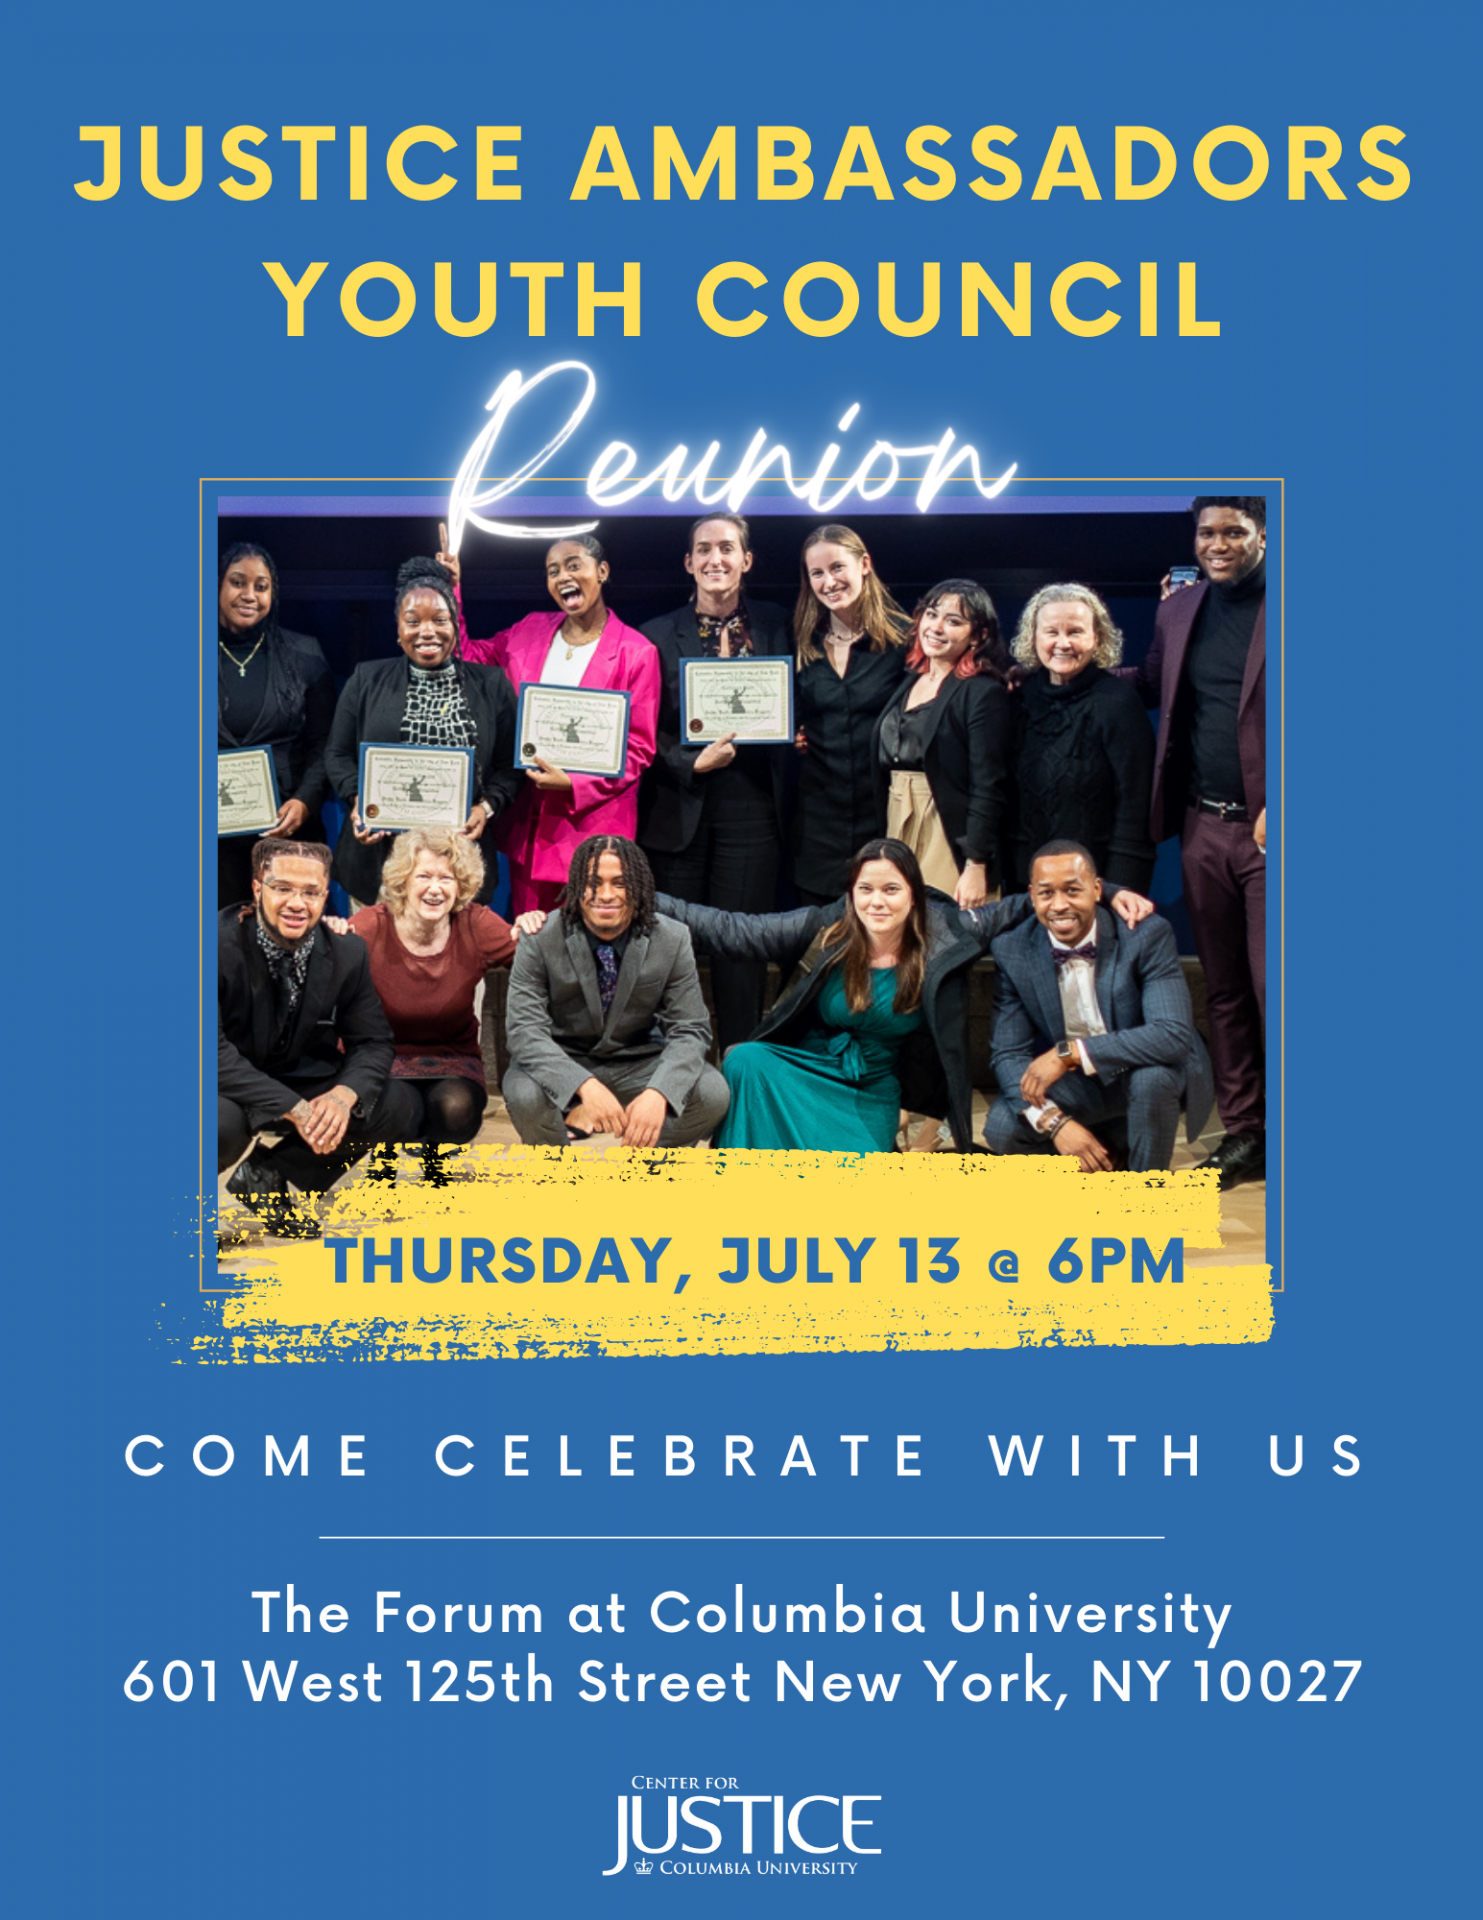 Justice Ambassadors Youth Council Reunion, Thursday July 13 at 6pm, Come Celebrate With Us, The Forum at Columbia University, 601 W. 125th Street